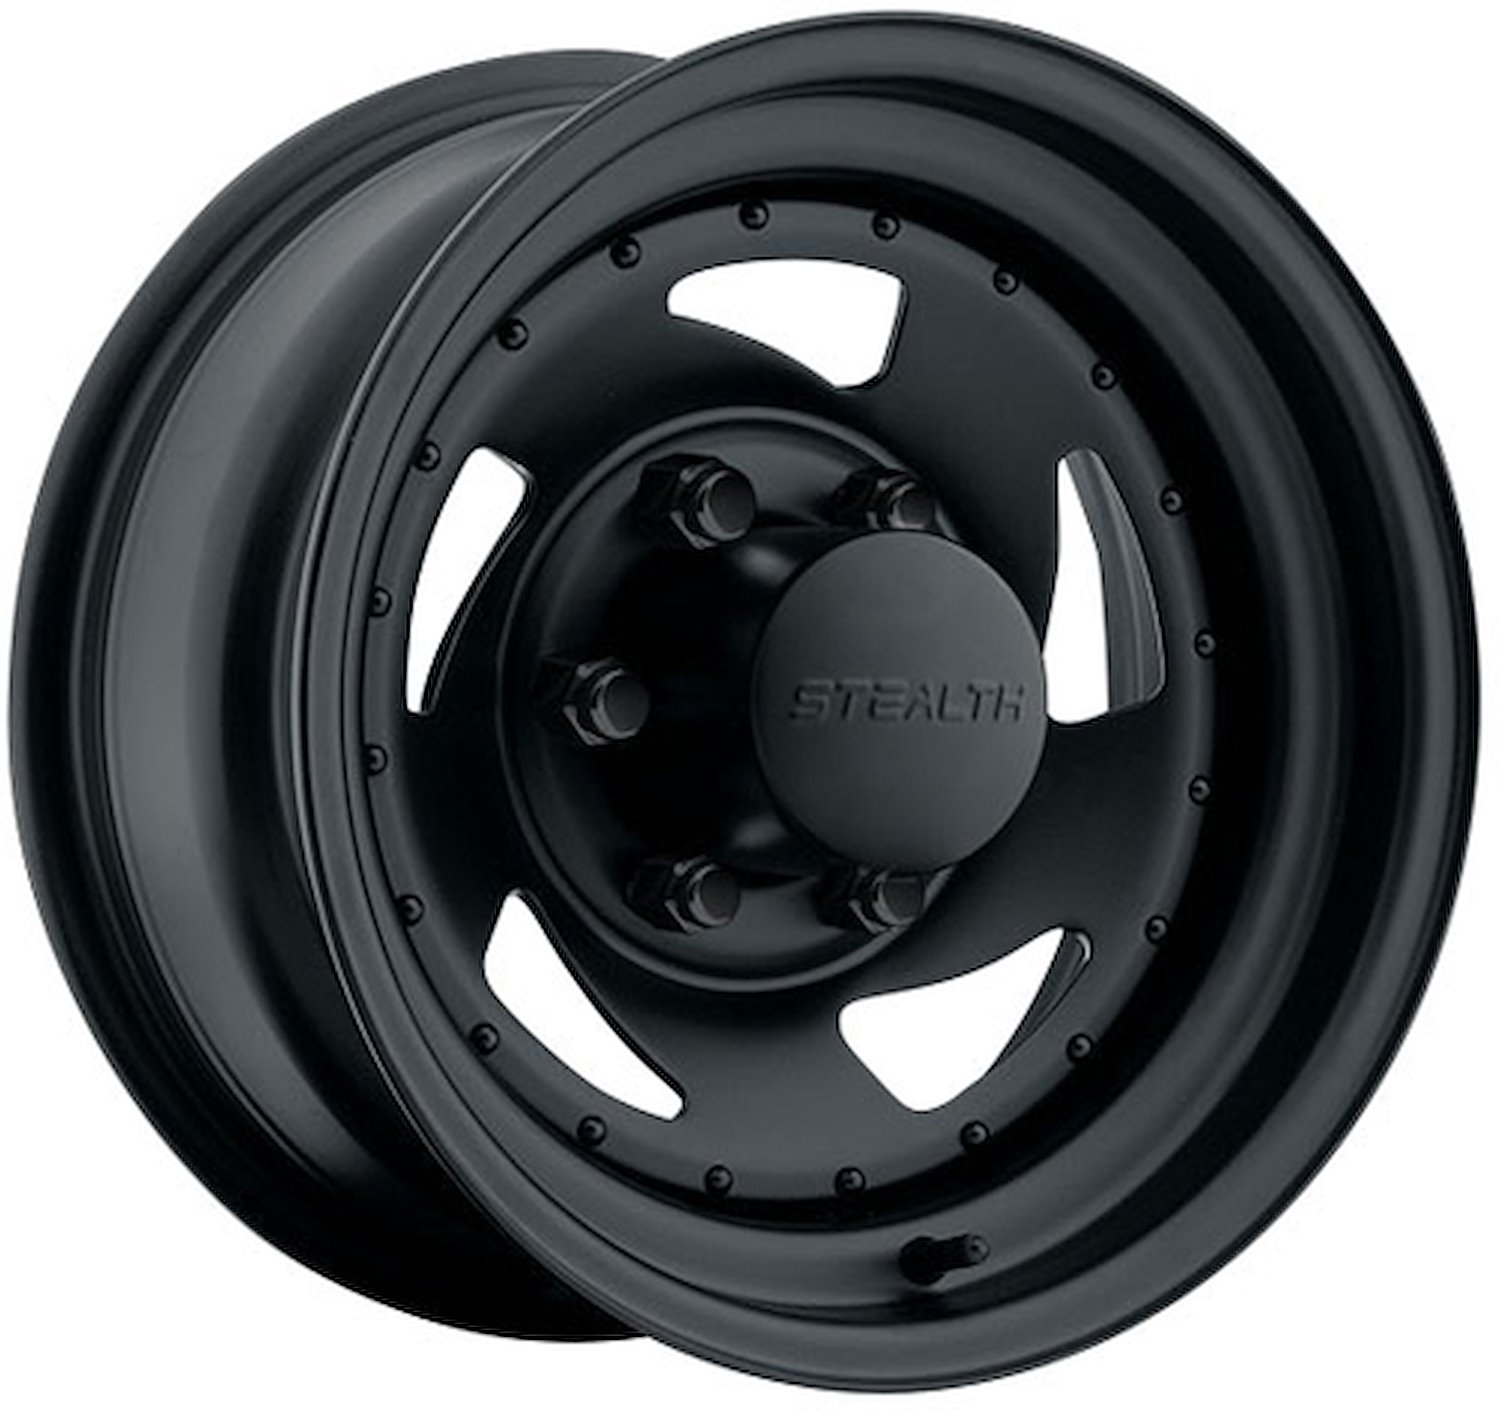 STEALTH BLACK BLADE 15 x 8 6 x 55 Bolt Circle 375 Back Spacing 19 offset 428 Center Bore 1500 lbs Load Rating